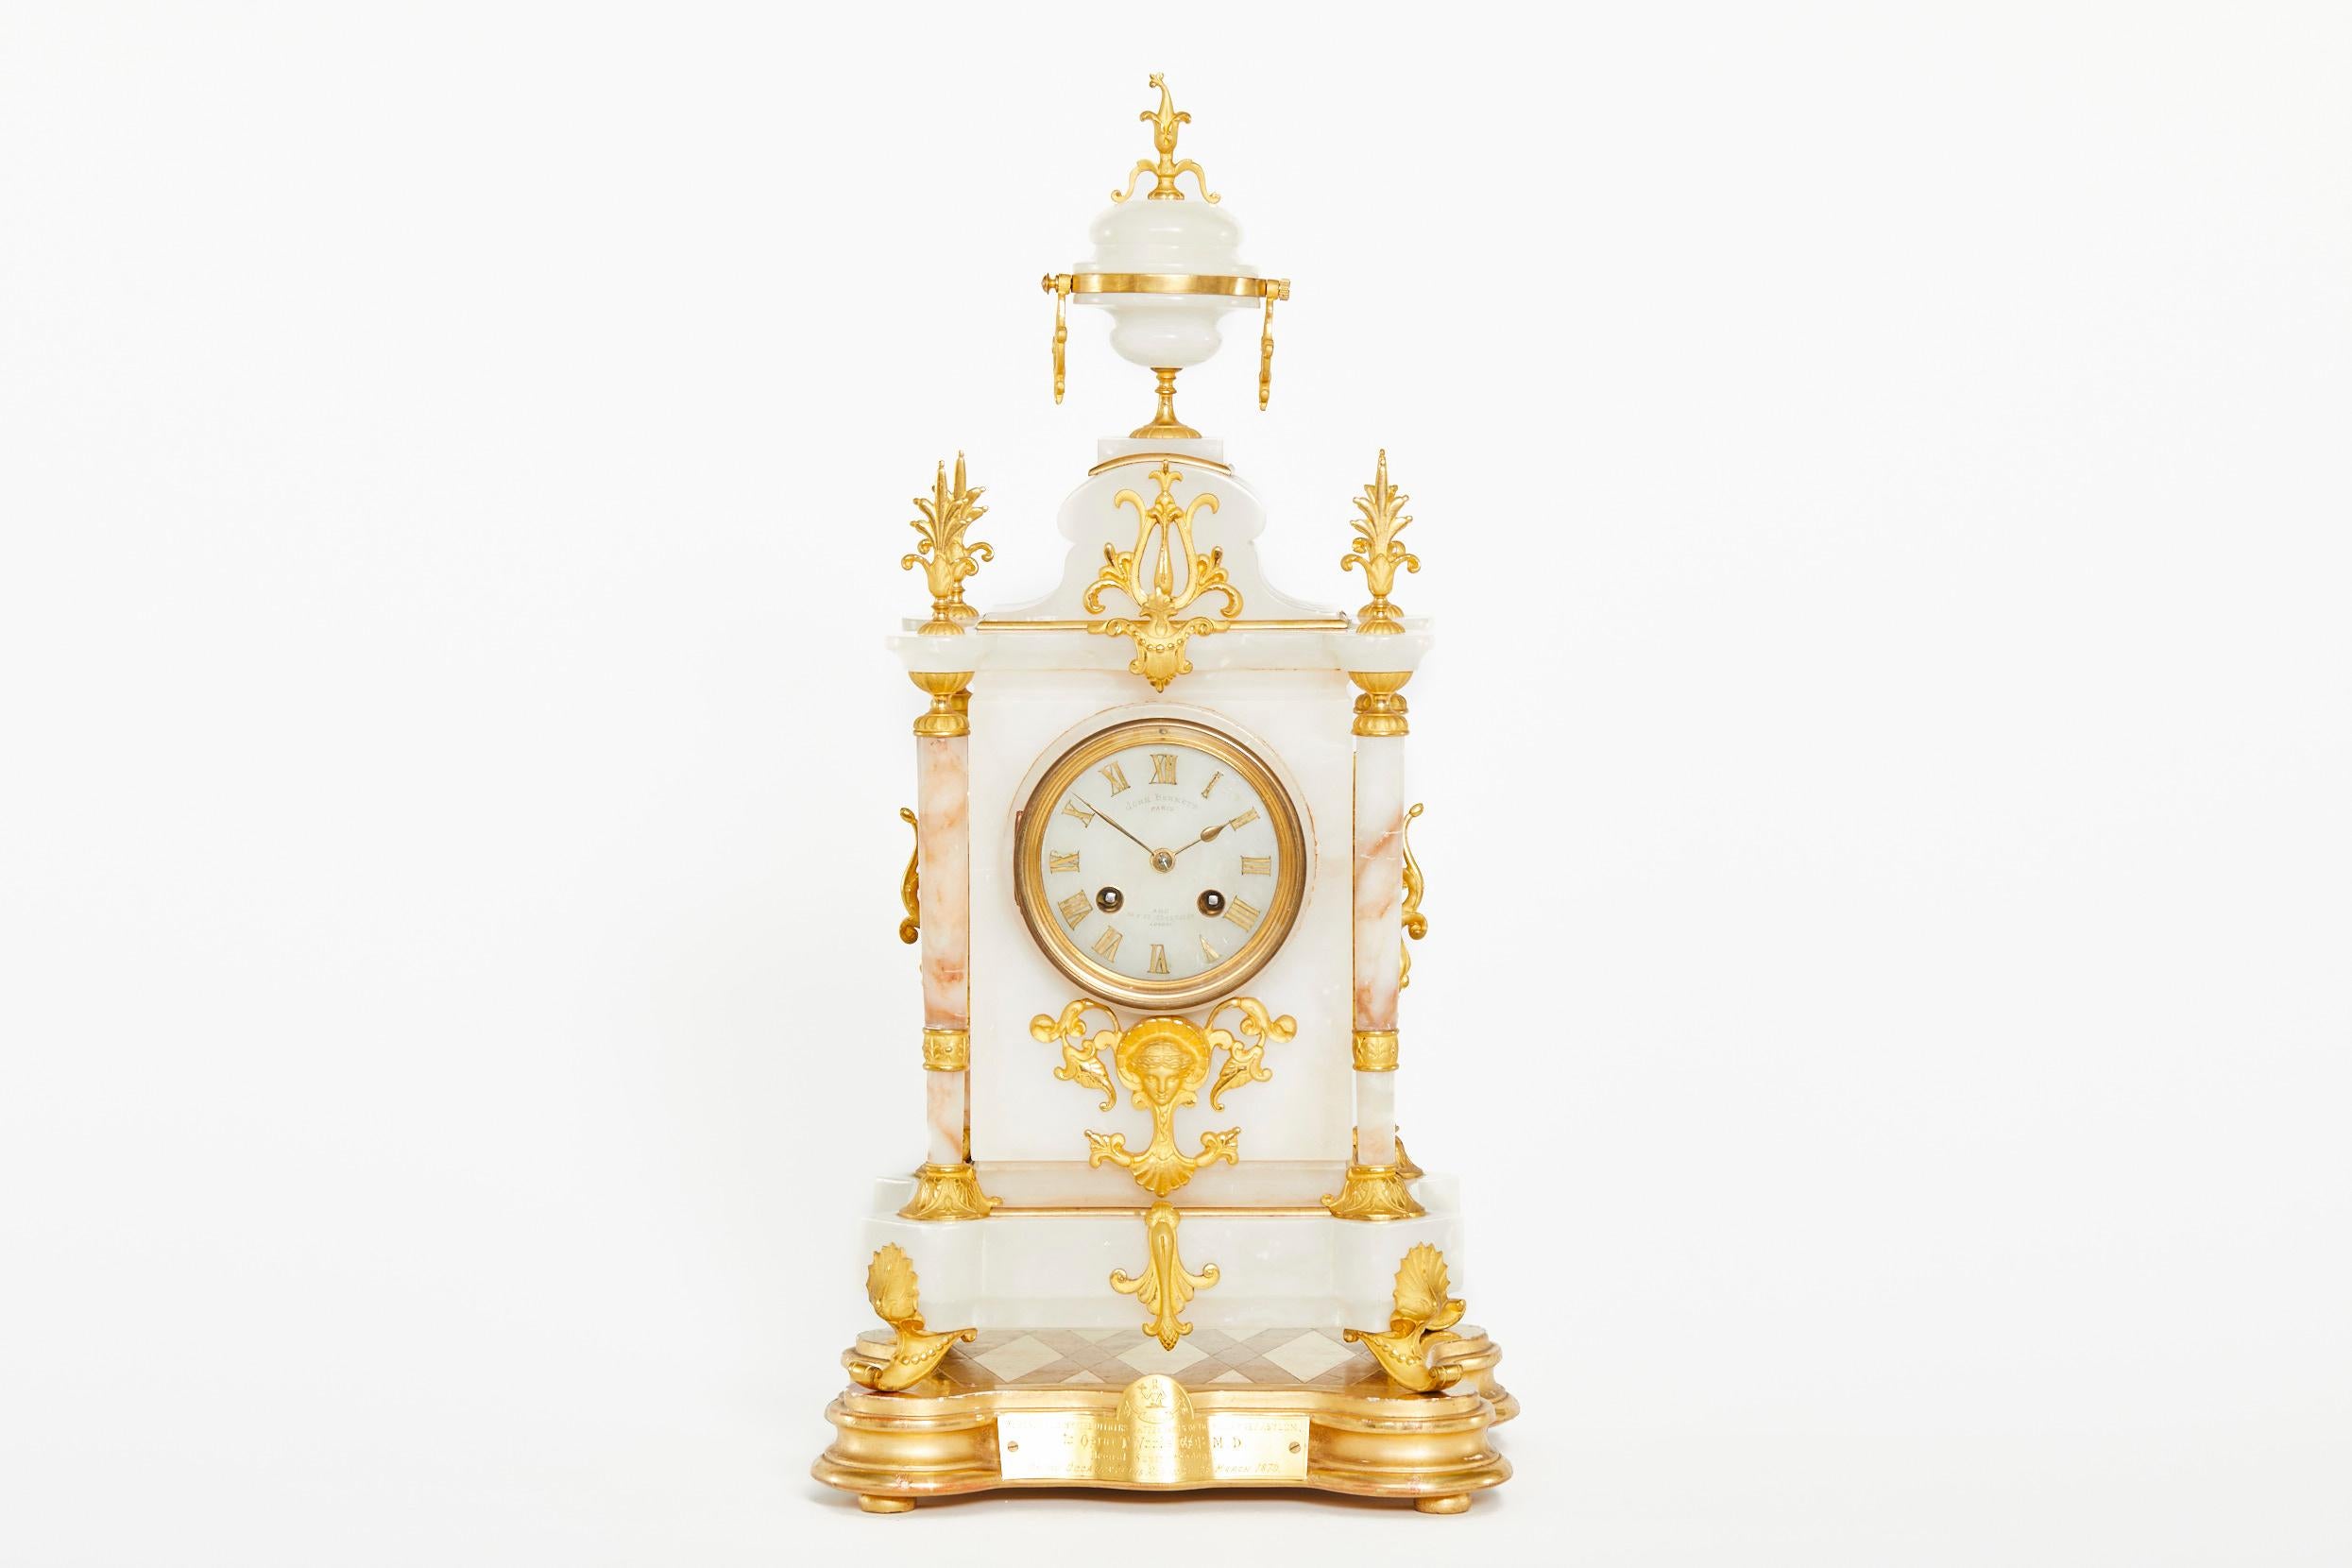 19th Century French Alabaster / Gilt Mantel Clock For Sale 4